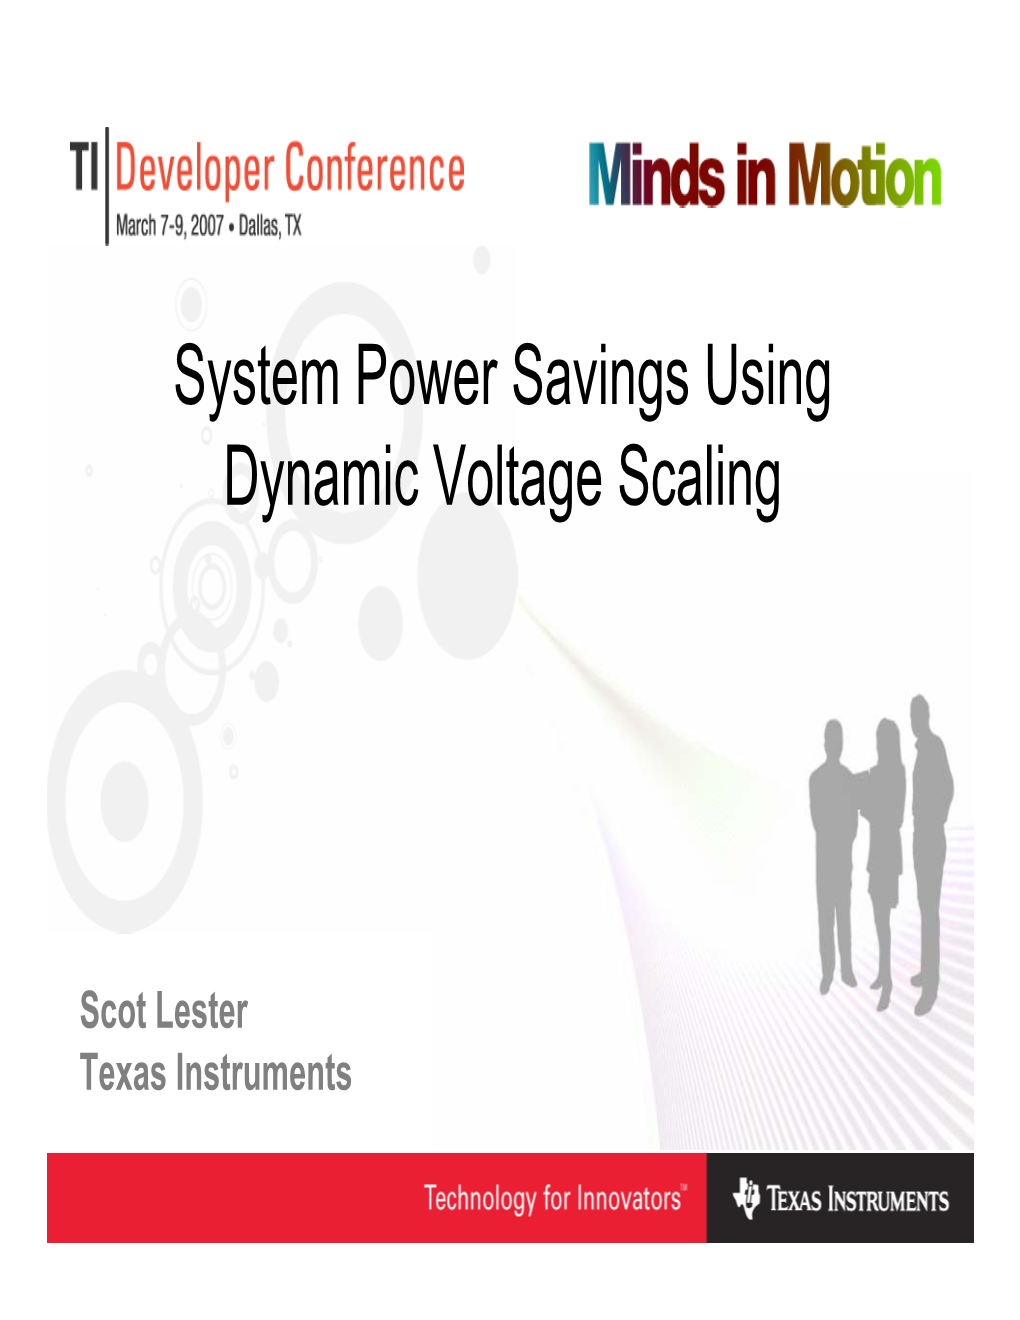 System Power Savings Using Dynamic Voltage Scaling